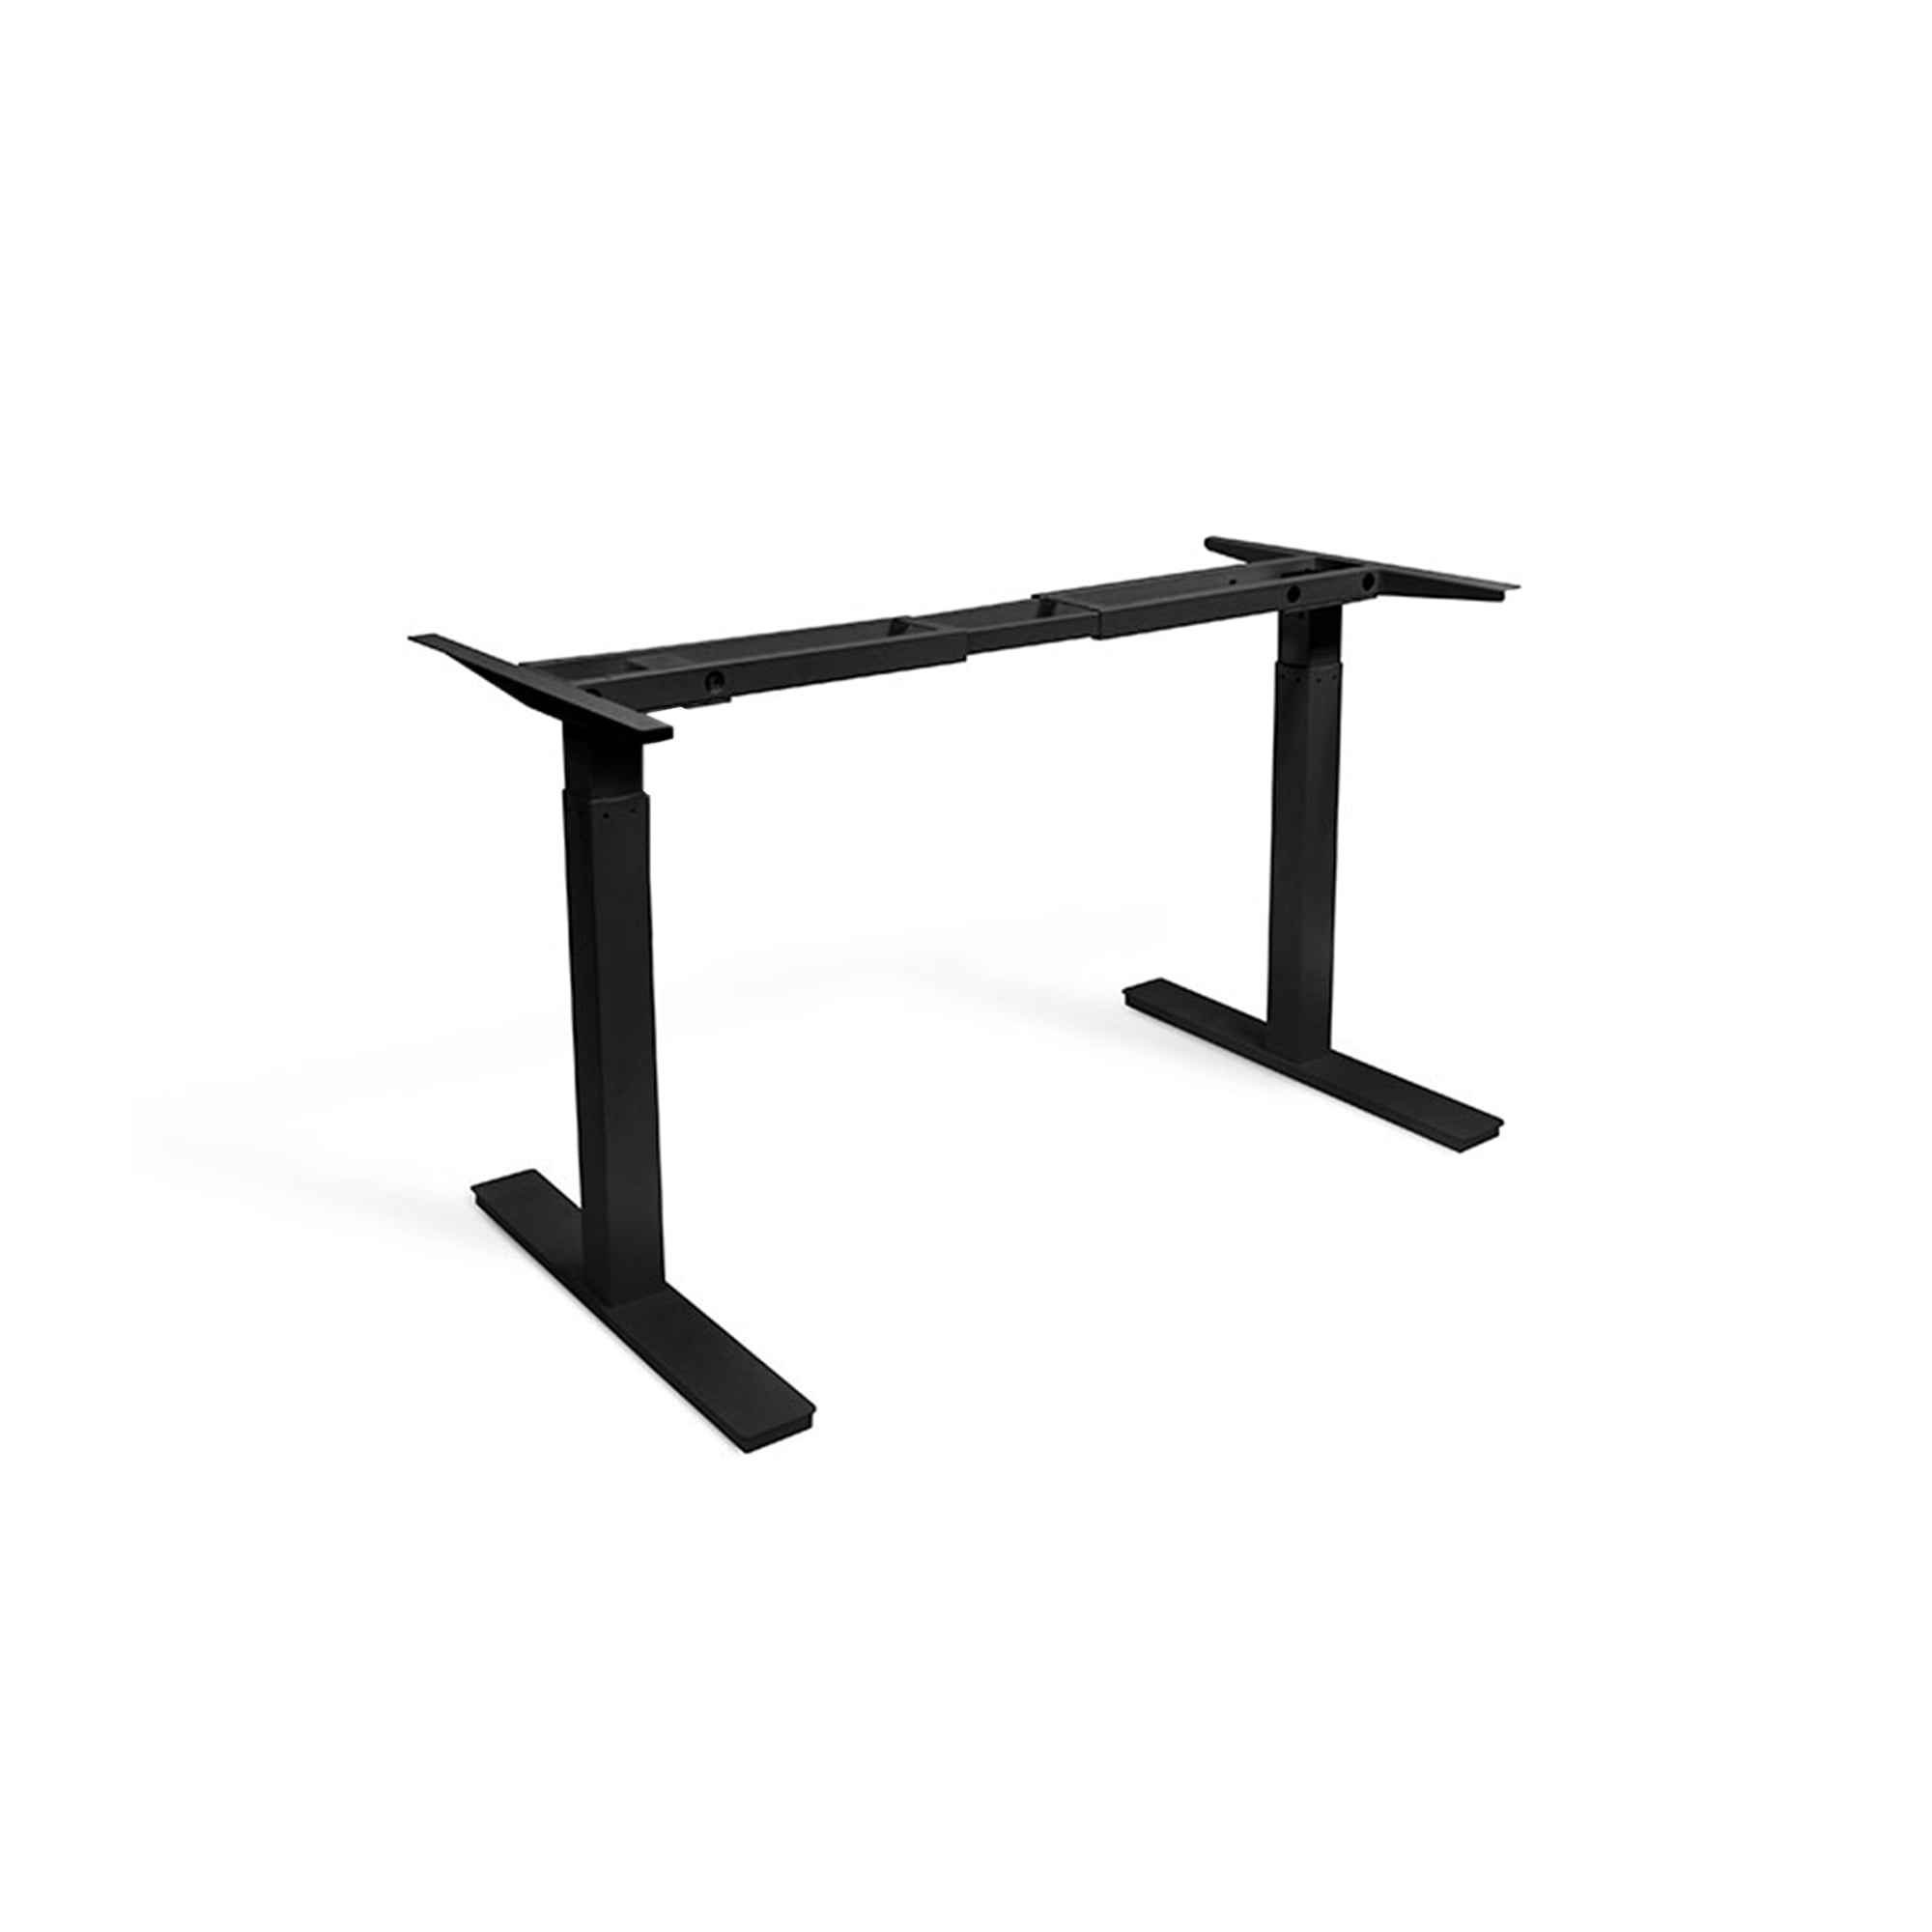 Autonomous A169 Edition Hybrid Dual Motor Electric Standing Desk Frame in Black (No Table Top), 28"-47" height range, 39"-70" le